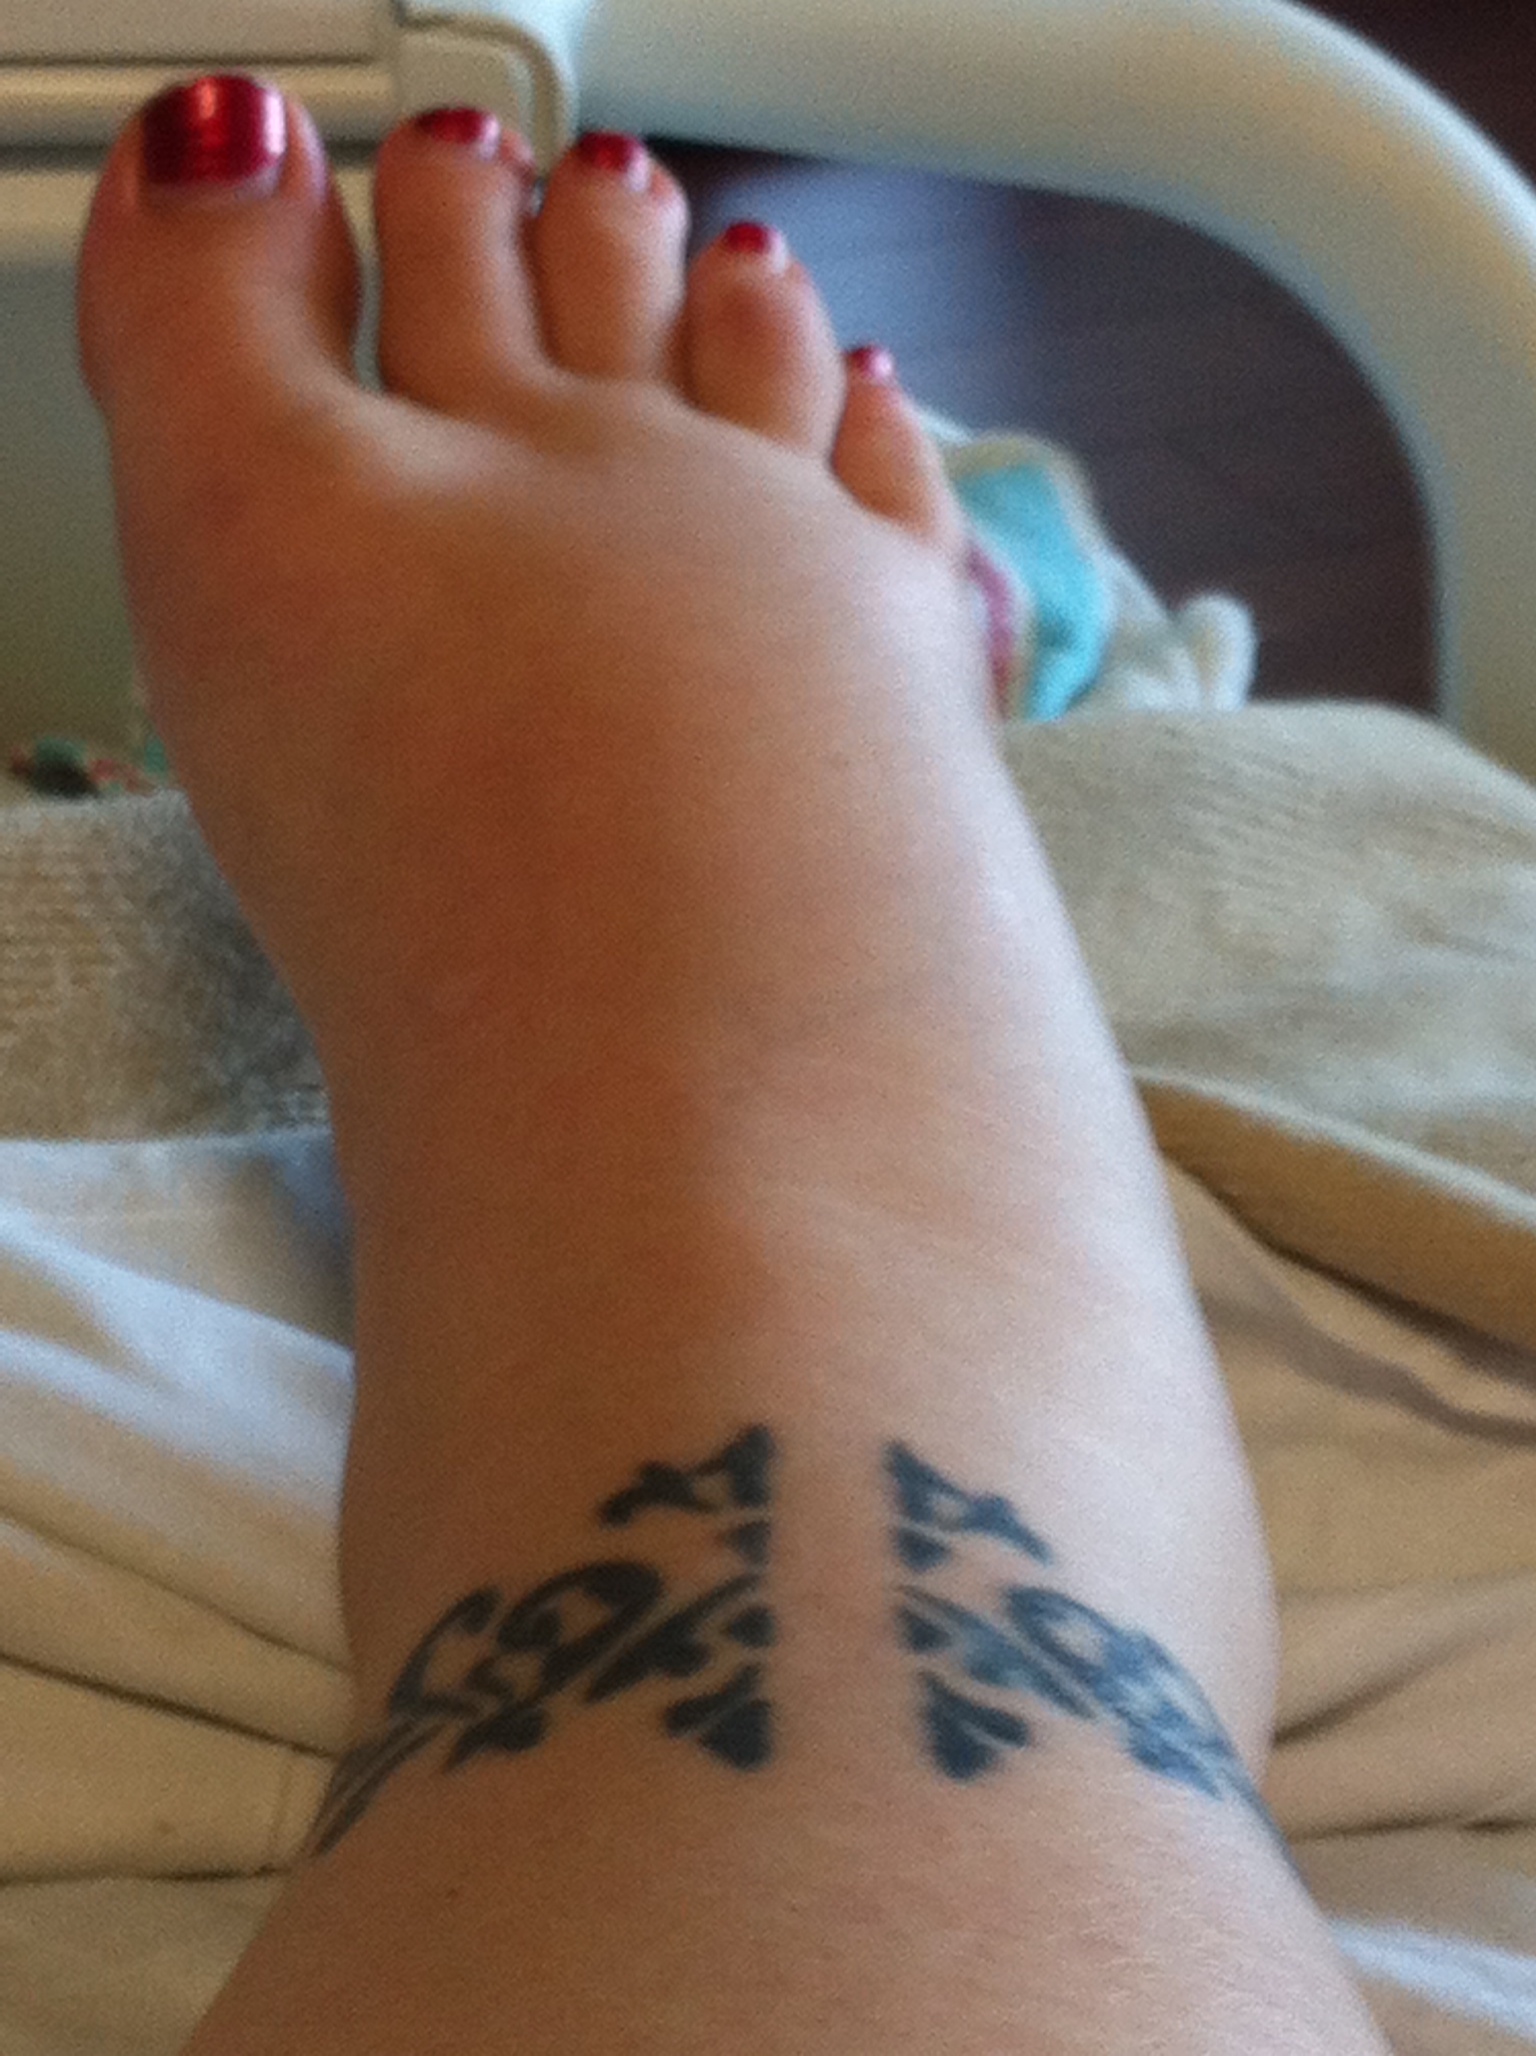 ankle swollen in last weeks of pregnancy, Wobbling Toward Grace, Part 2 :: On Being Imperfect